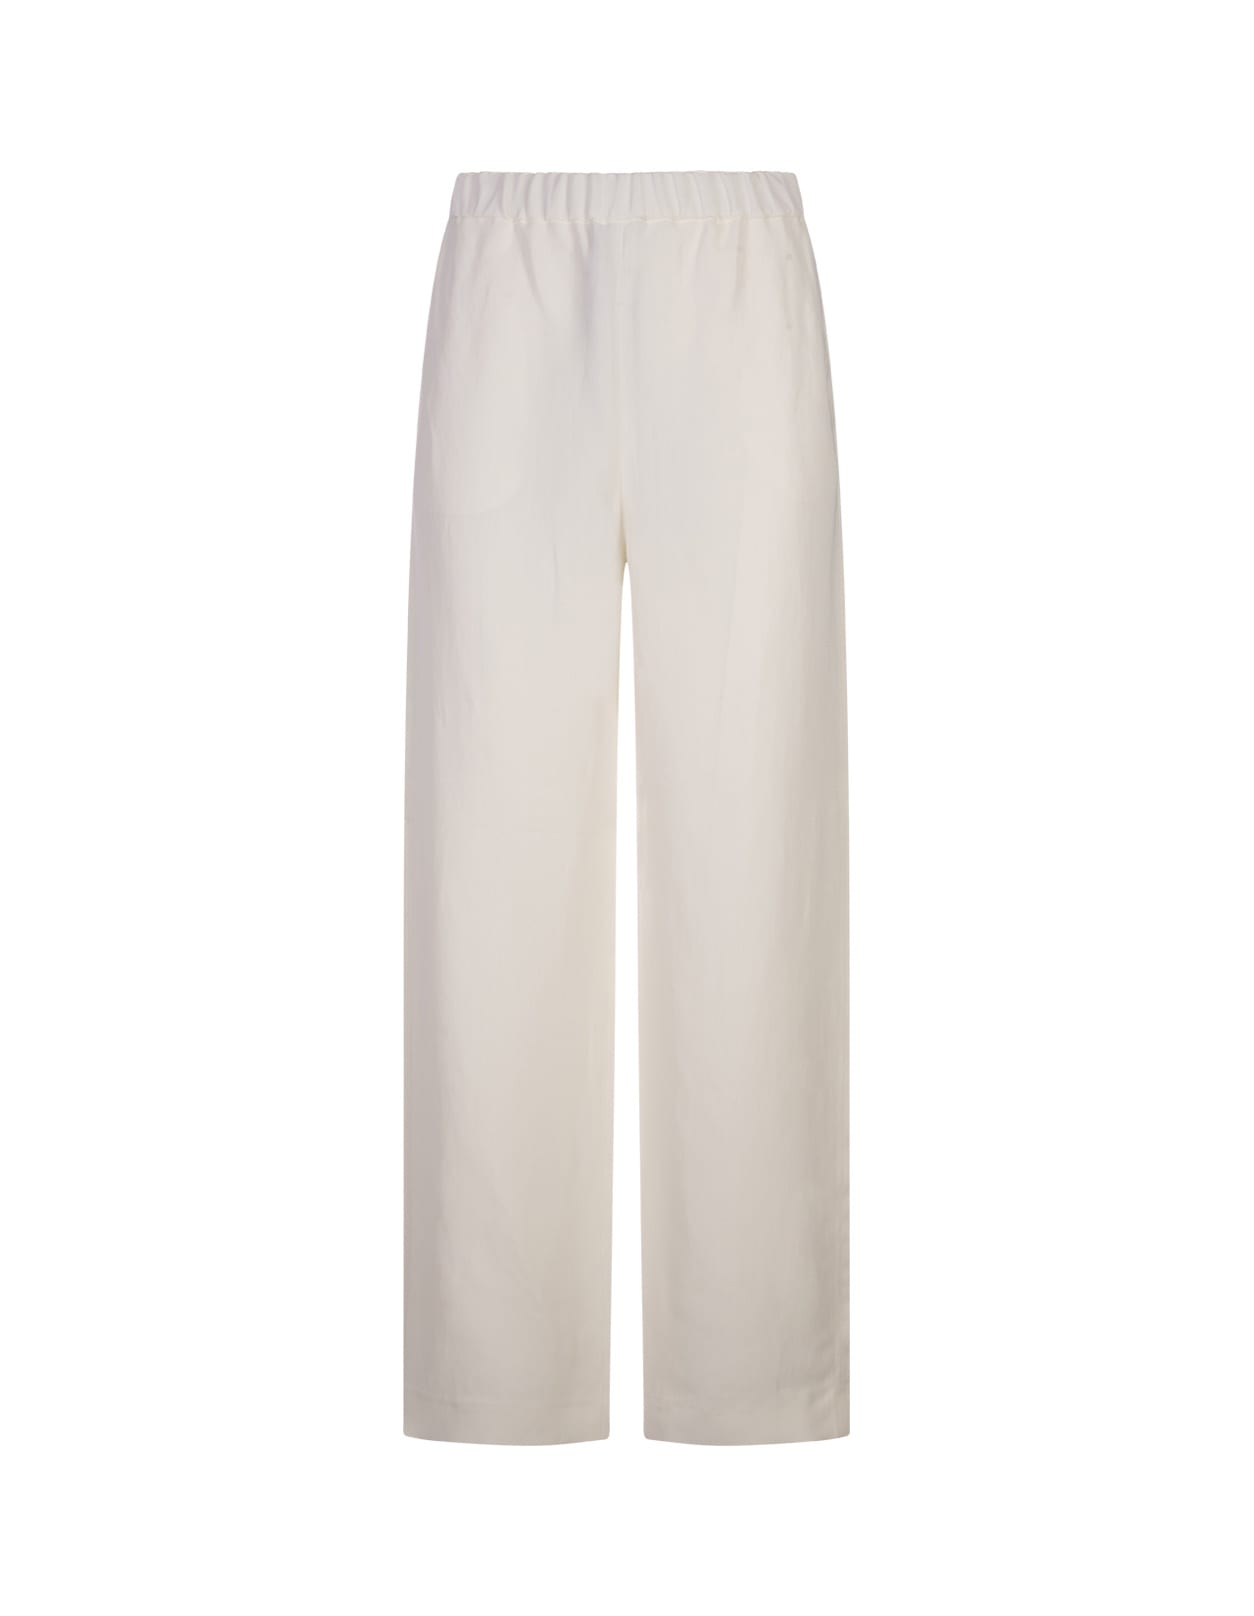 White Viscose And Linen Fluid Jogging Trousers